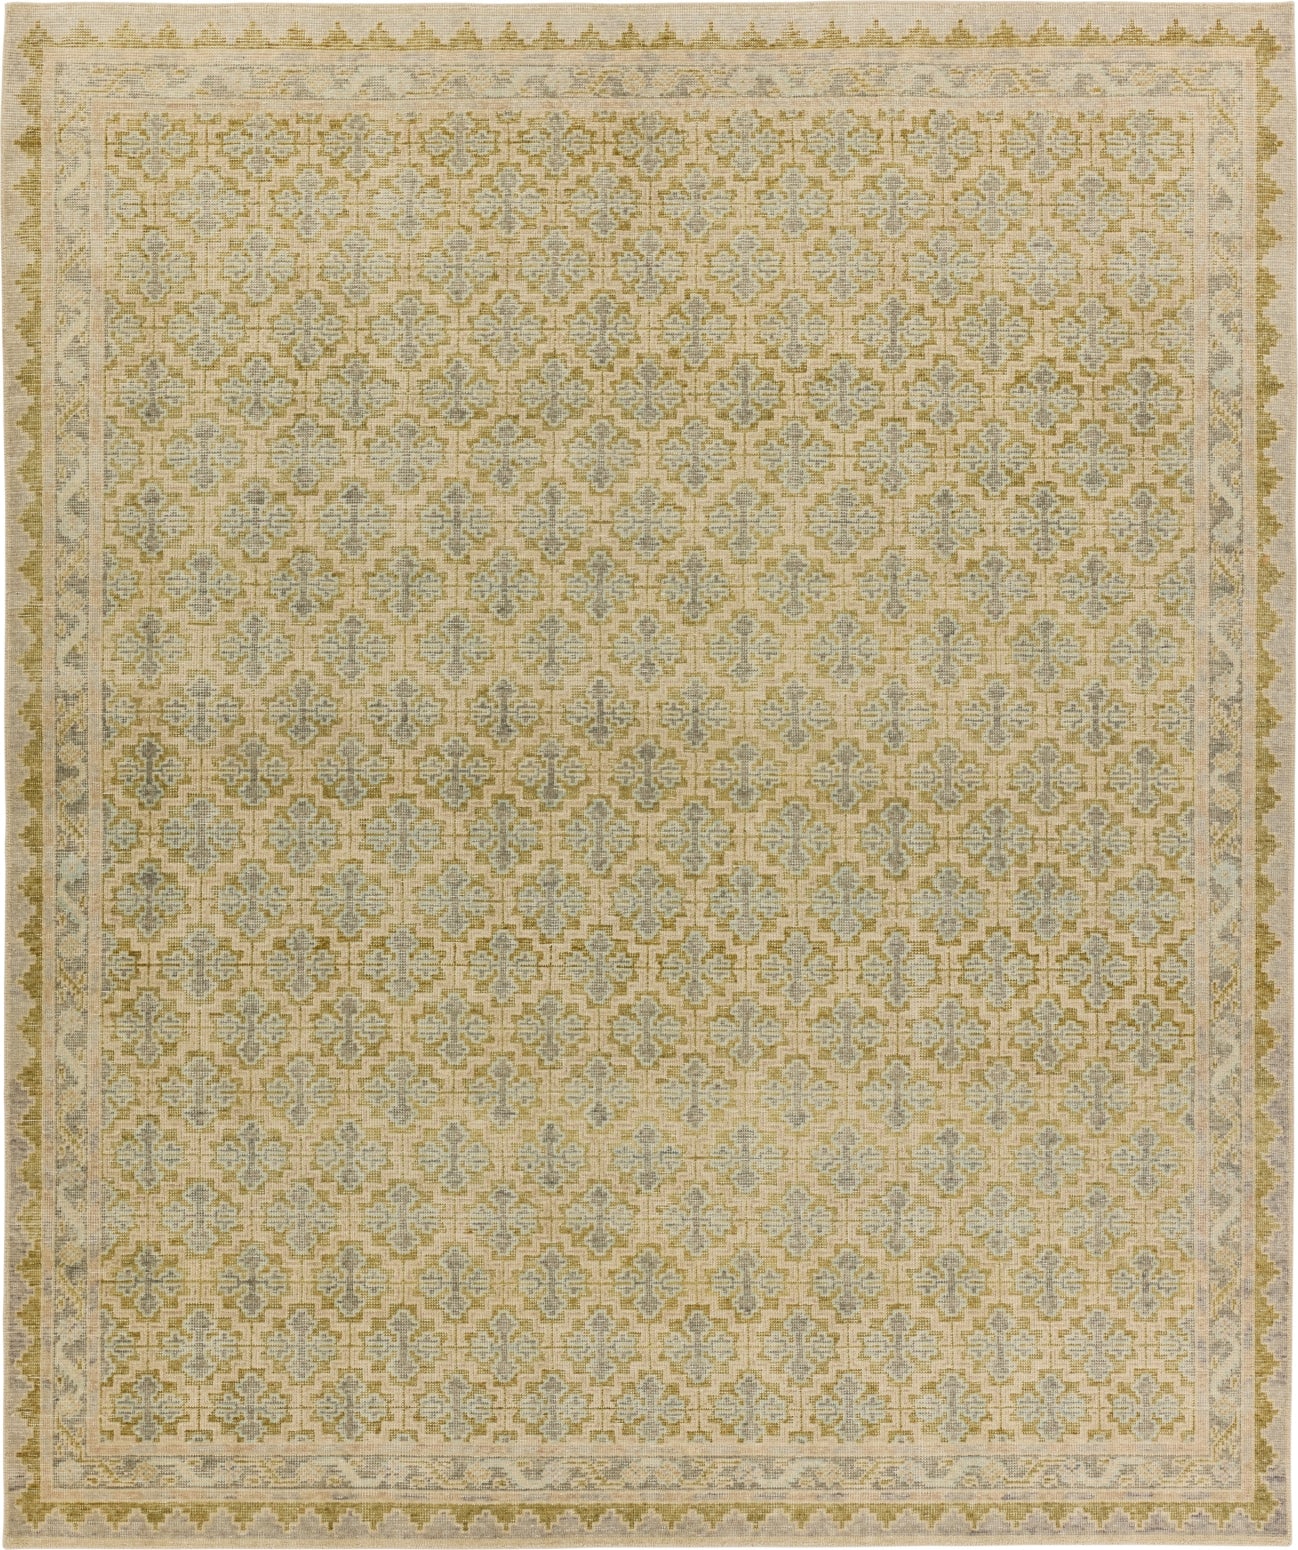 Jaipur Living Onessa Mildred ONE05 Blue/Green Area Rug